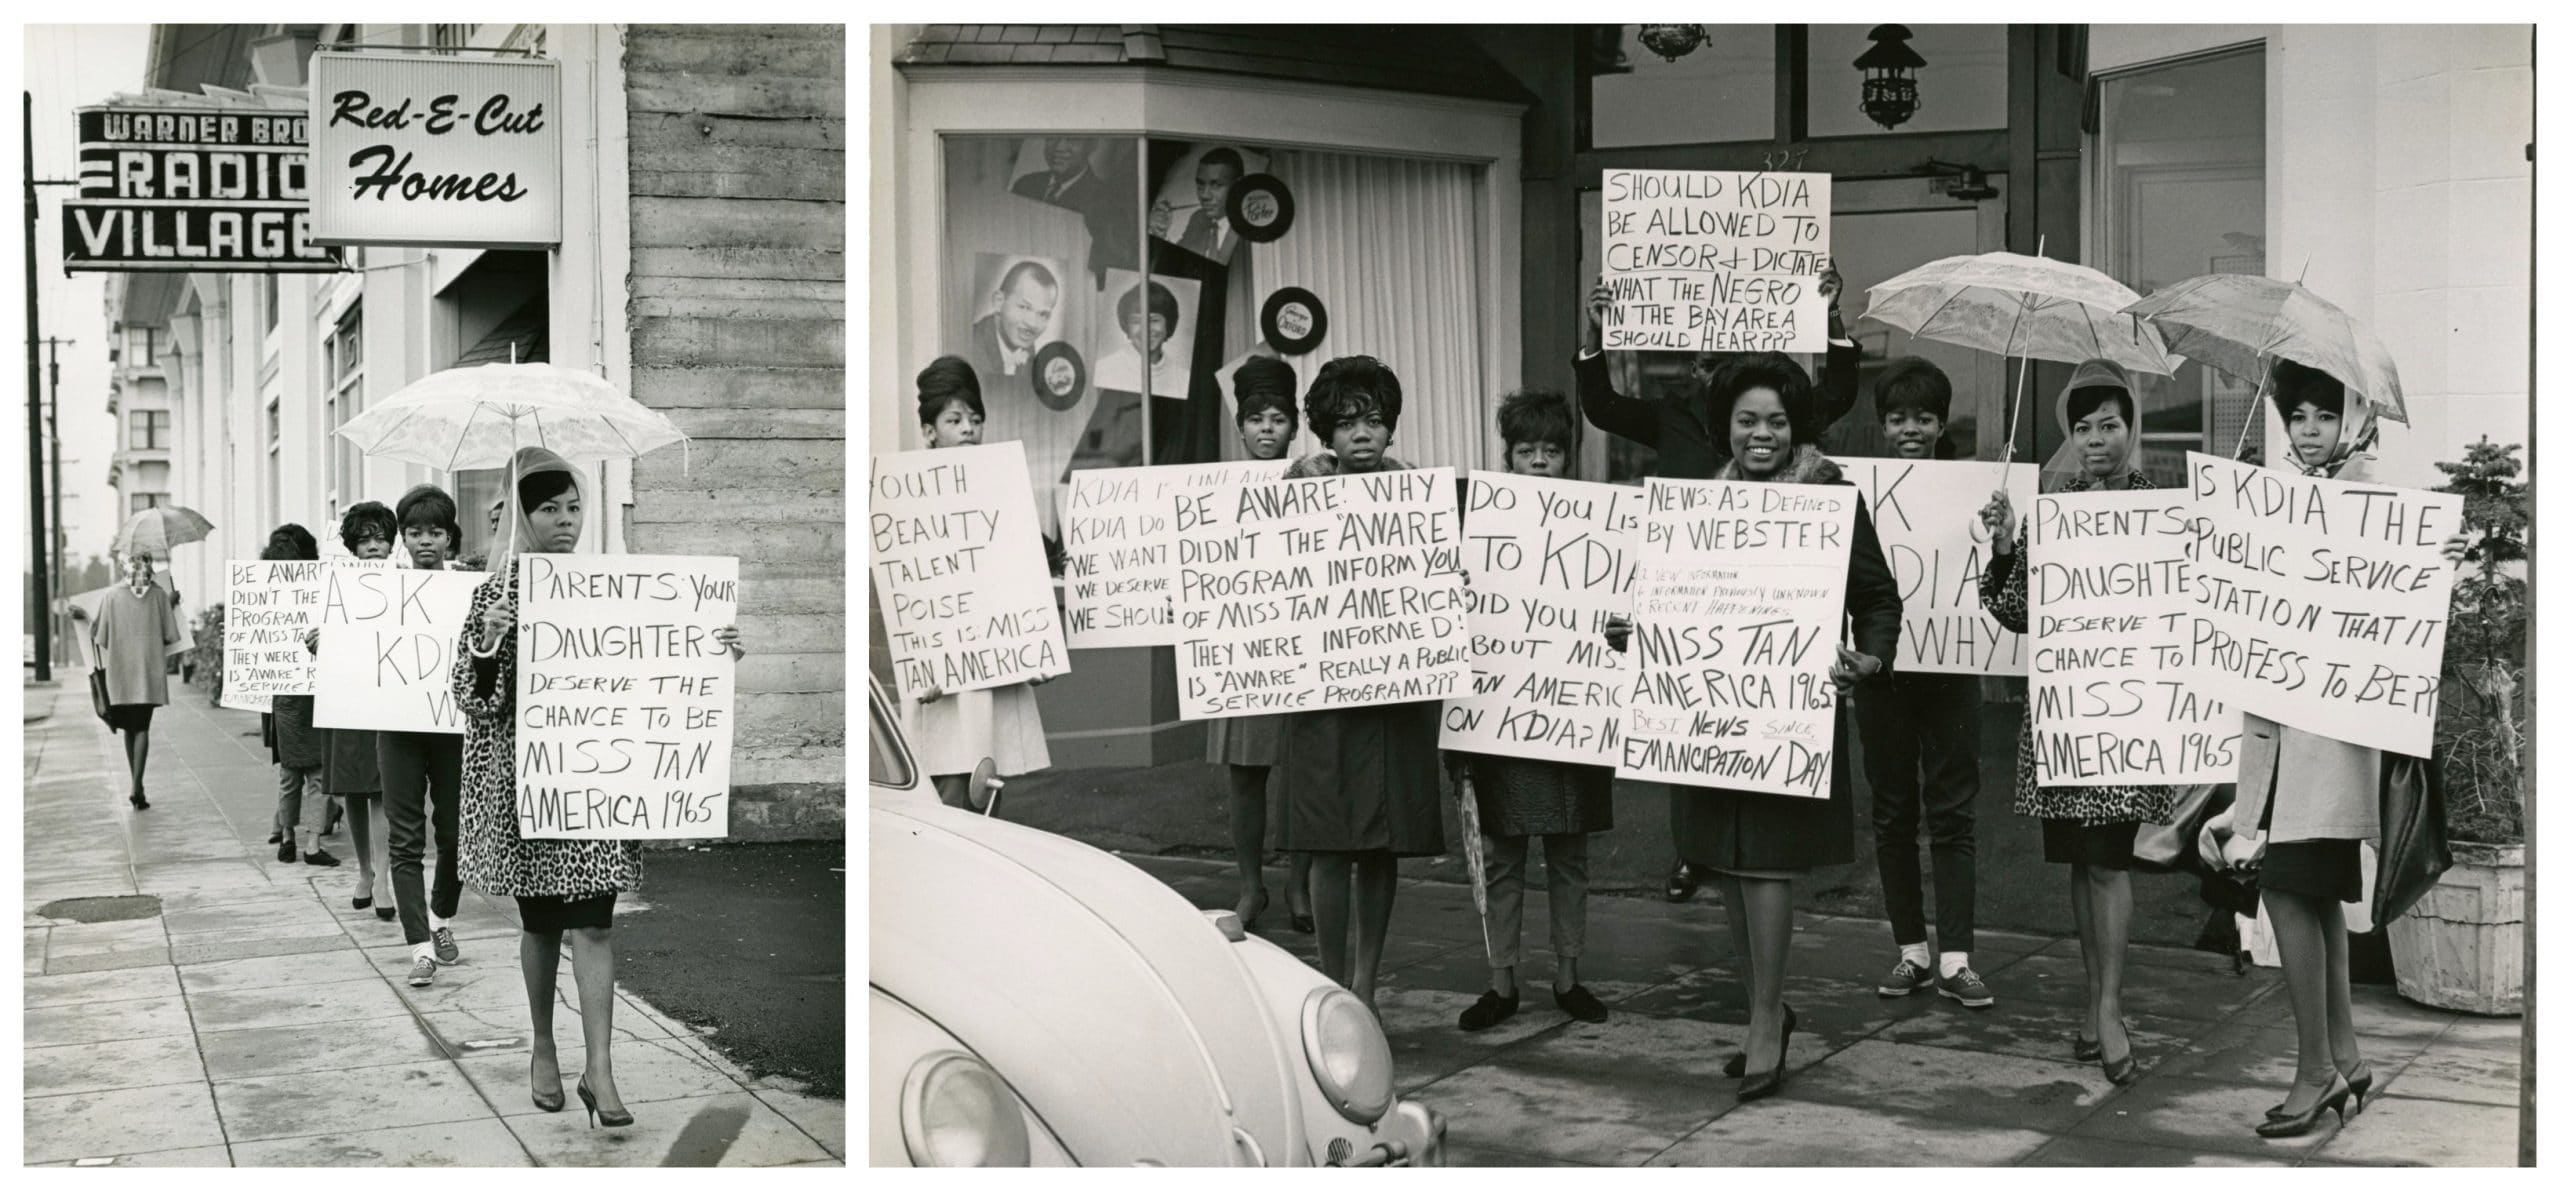 picket signs protesting previous hit KDIA and Miss Tan American Pageant